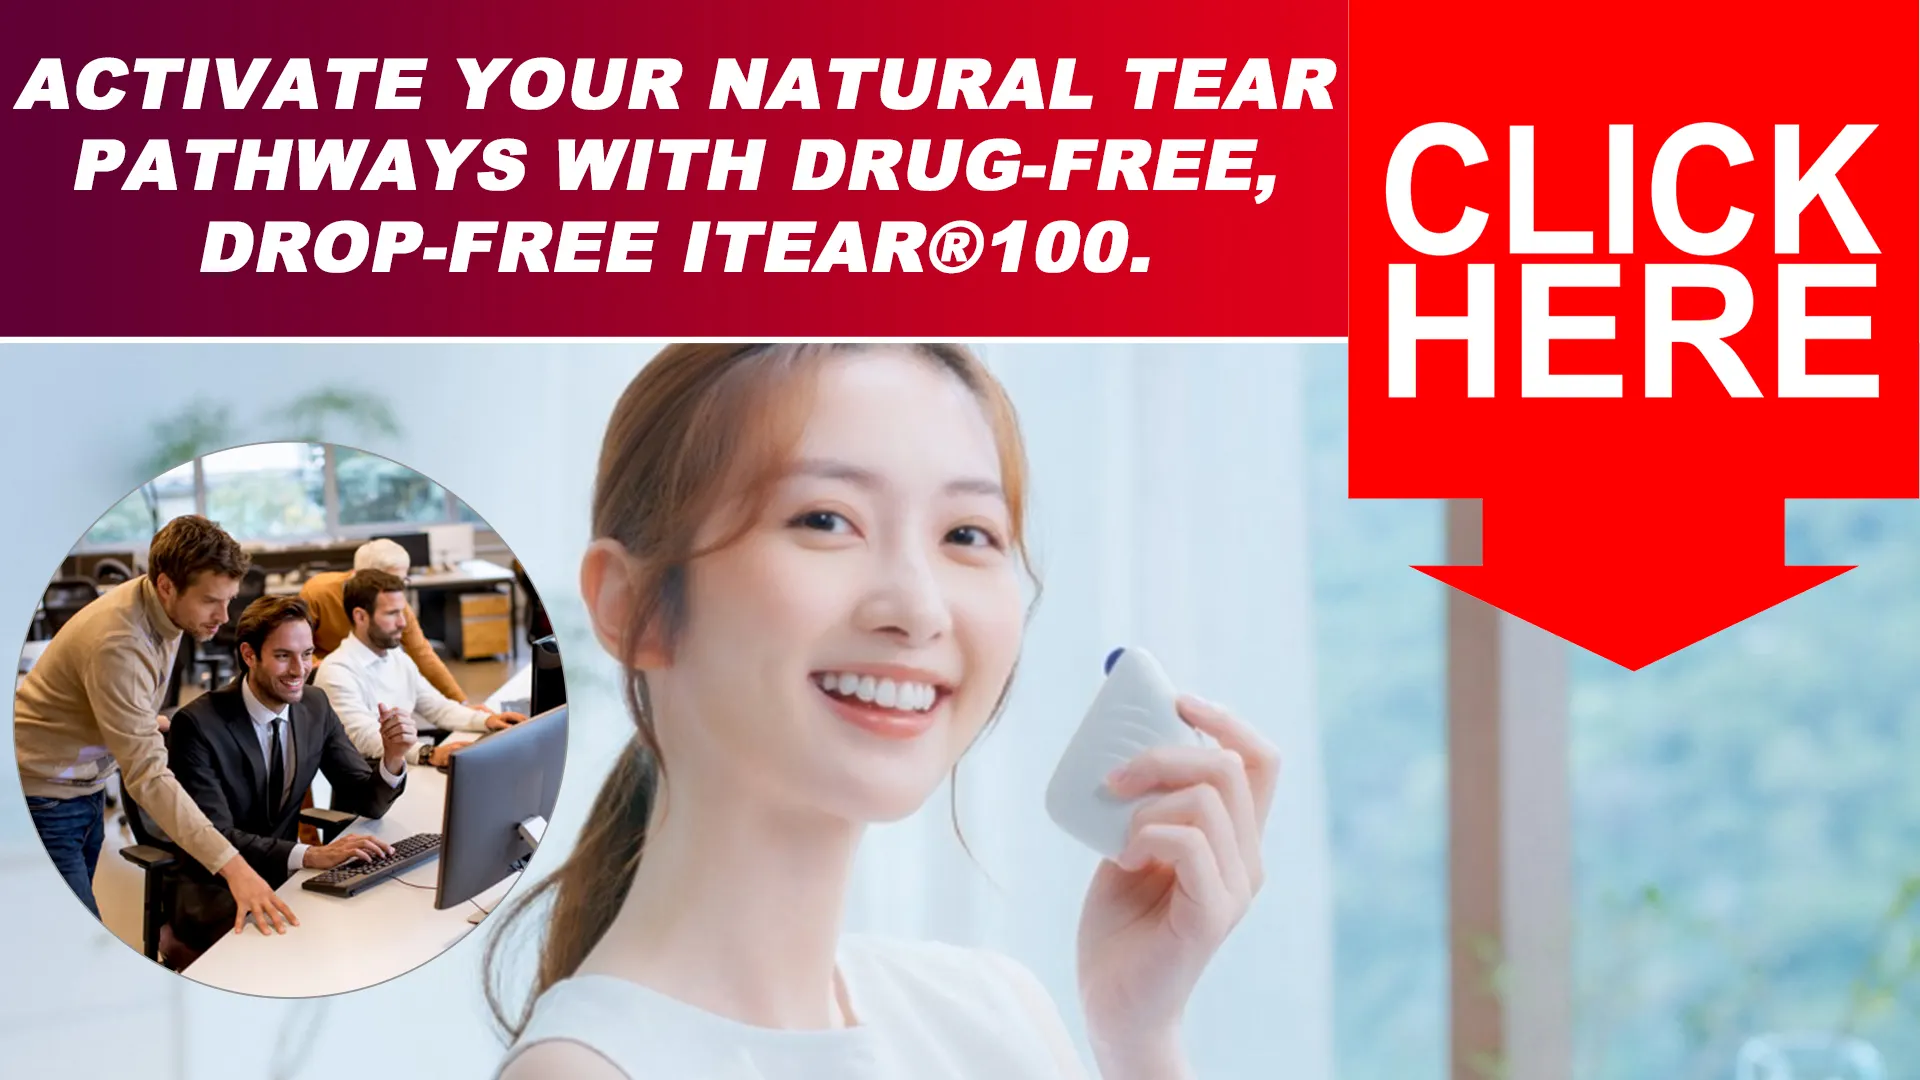 Why iTear100 Beats the Traditional Eye Drop Routine